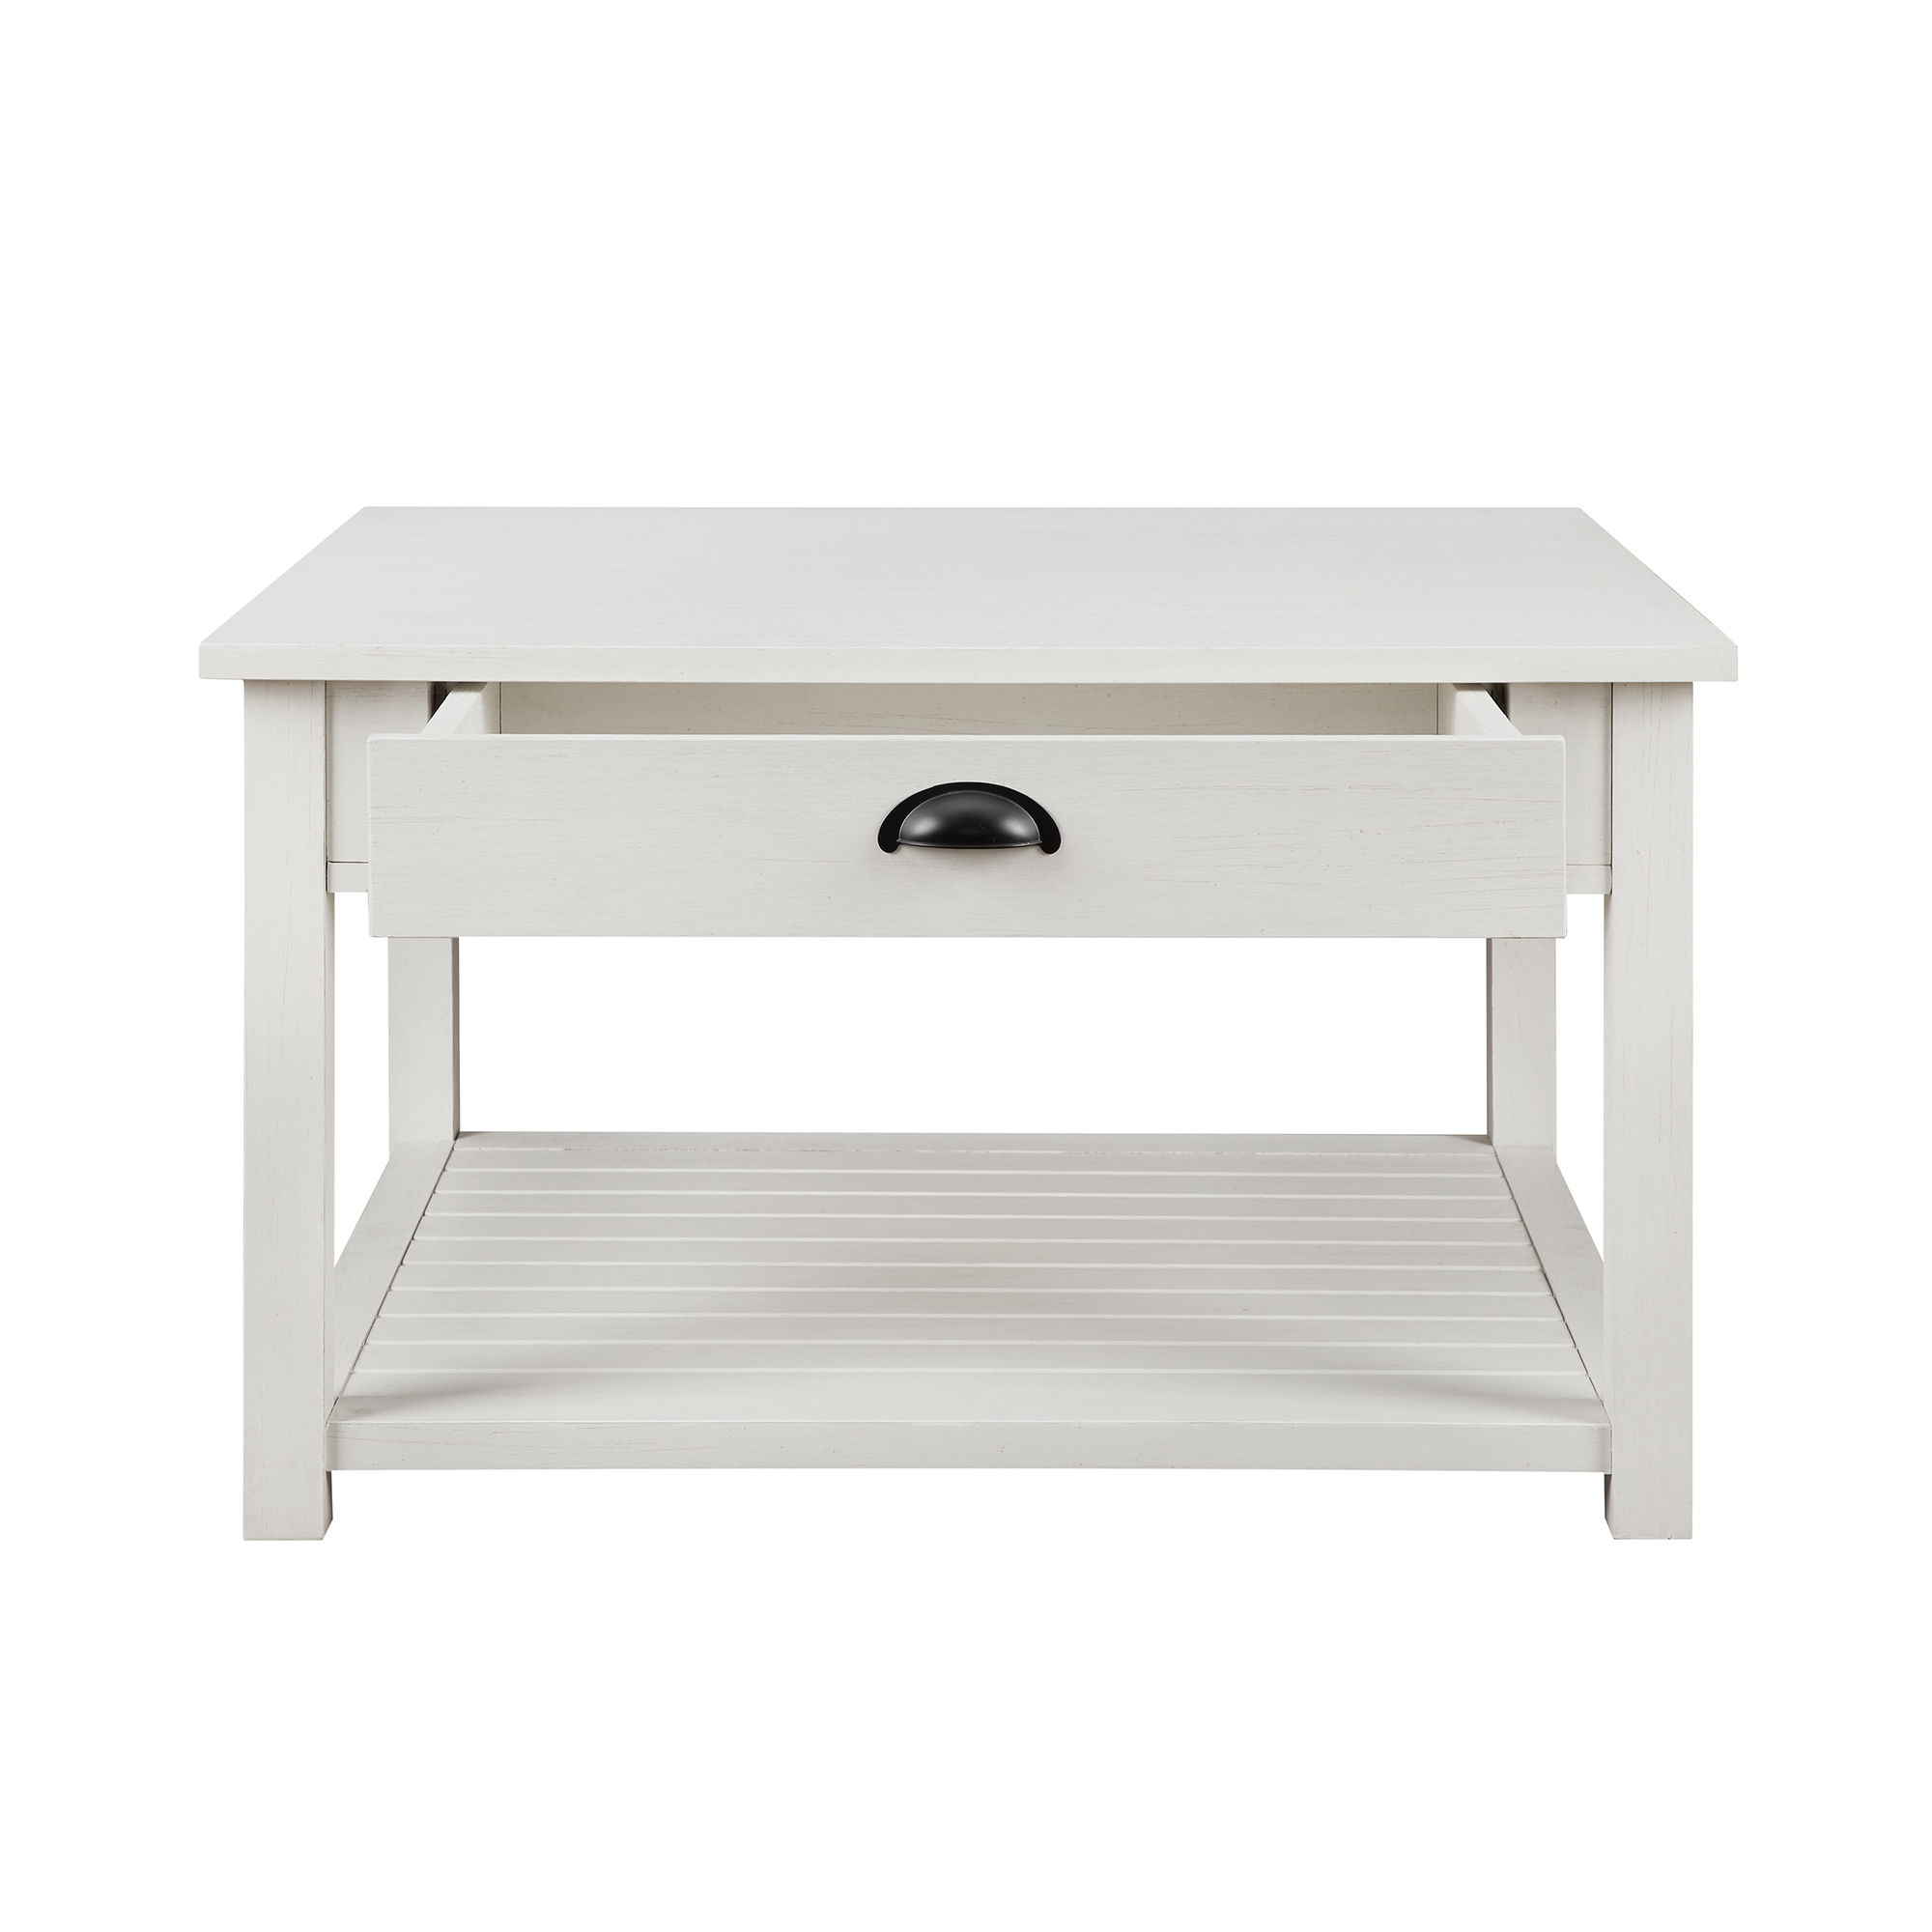 Manor Park 30 inch Square Country Coffee Table, Brushed White - image 6 of 10